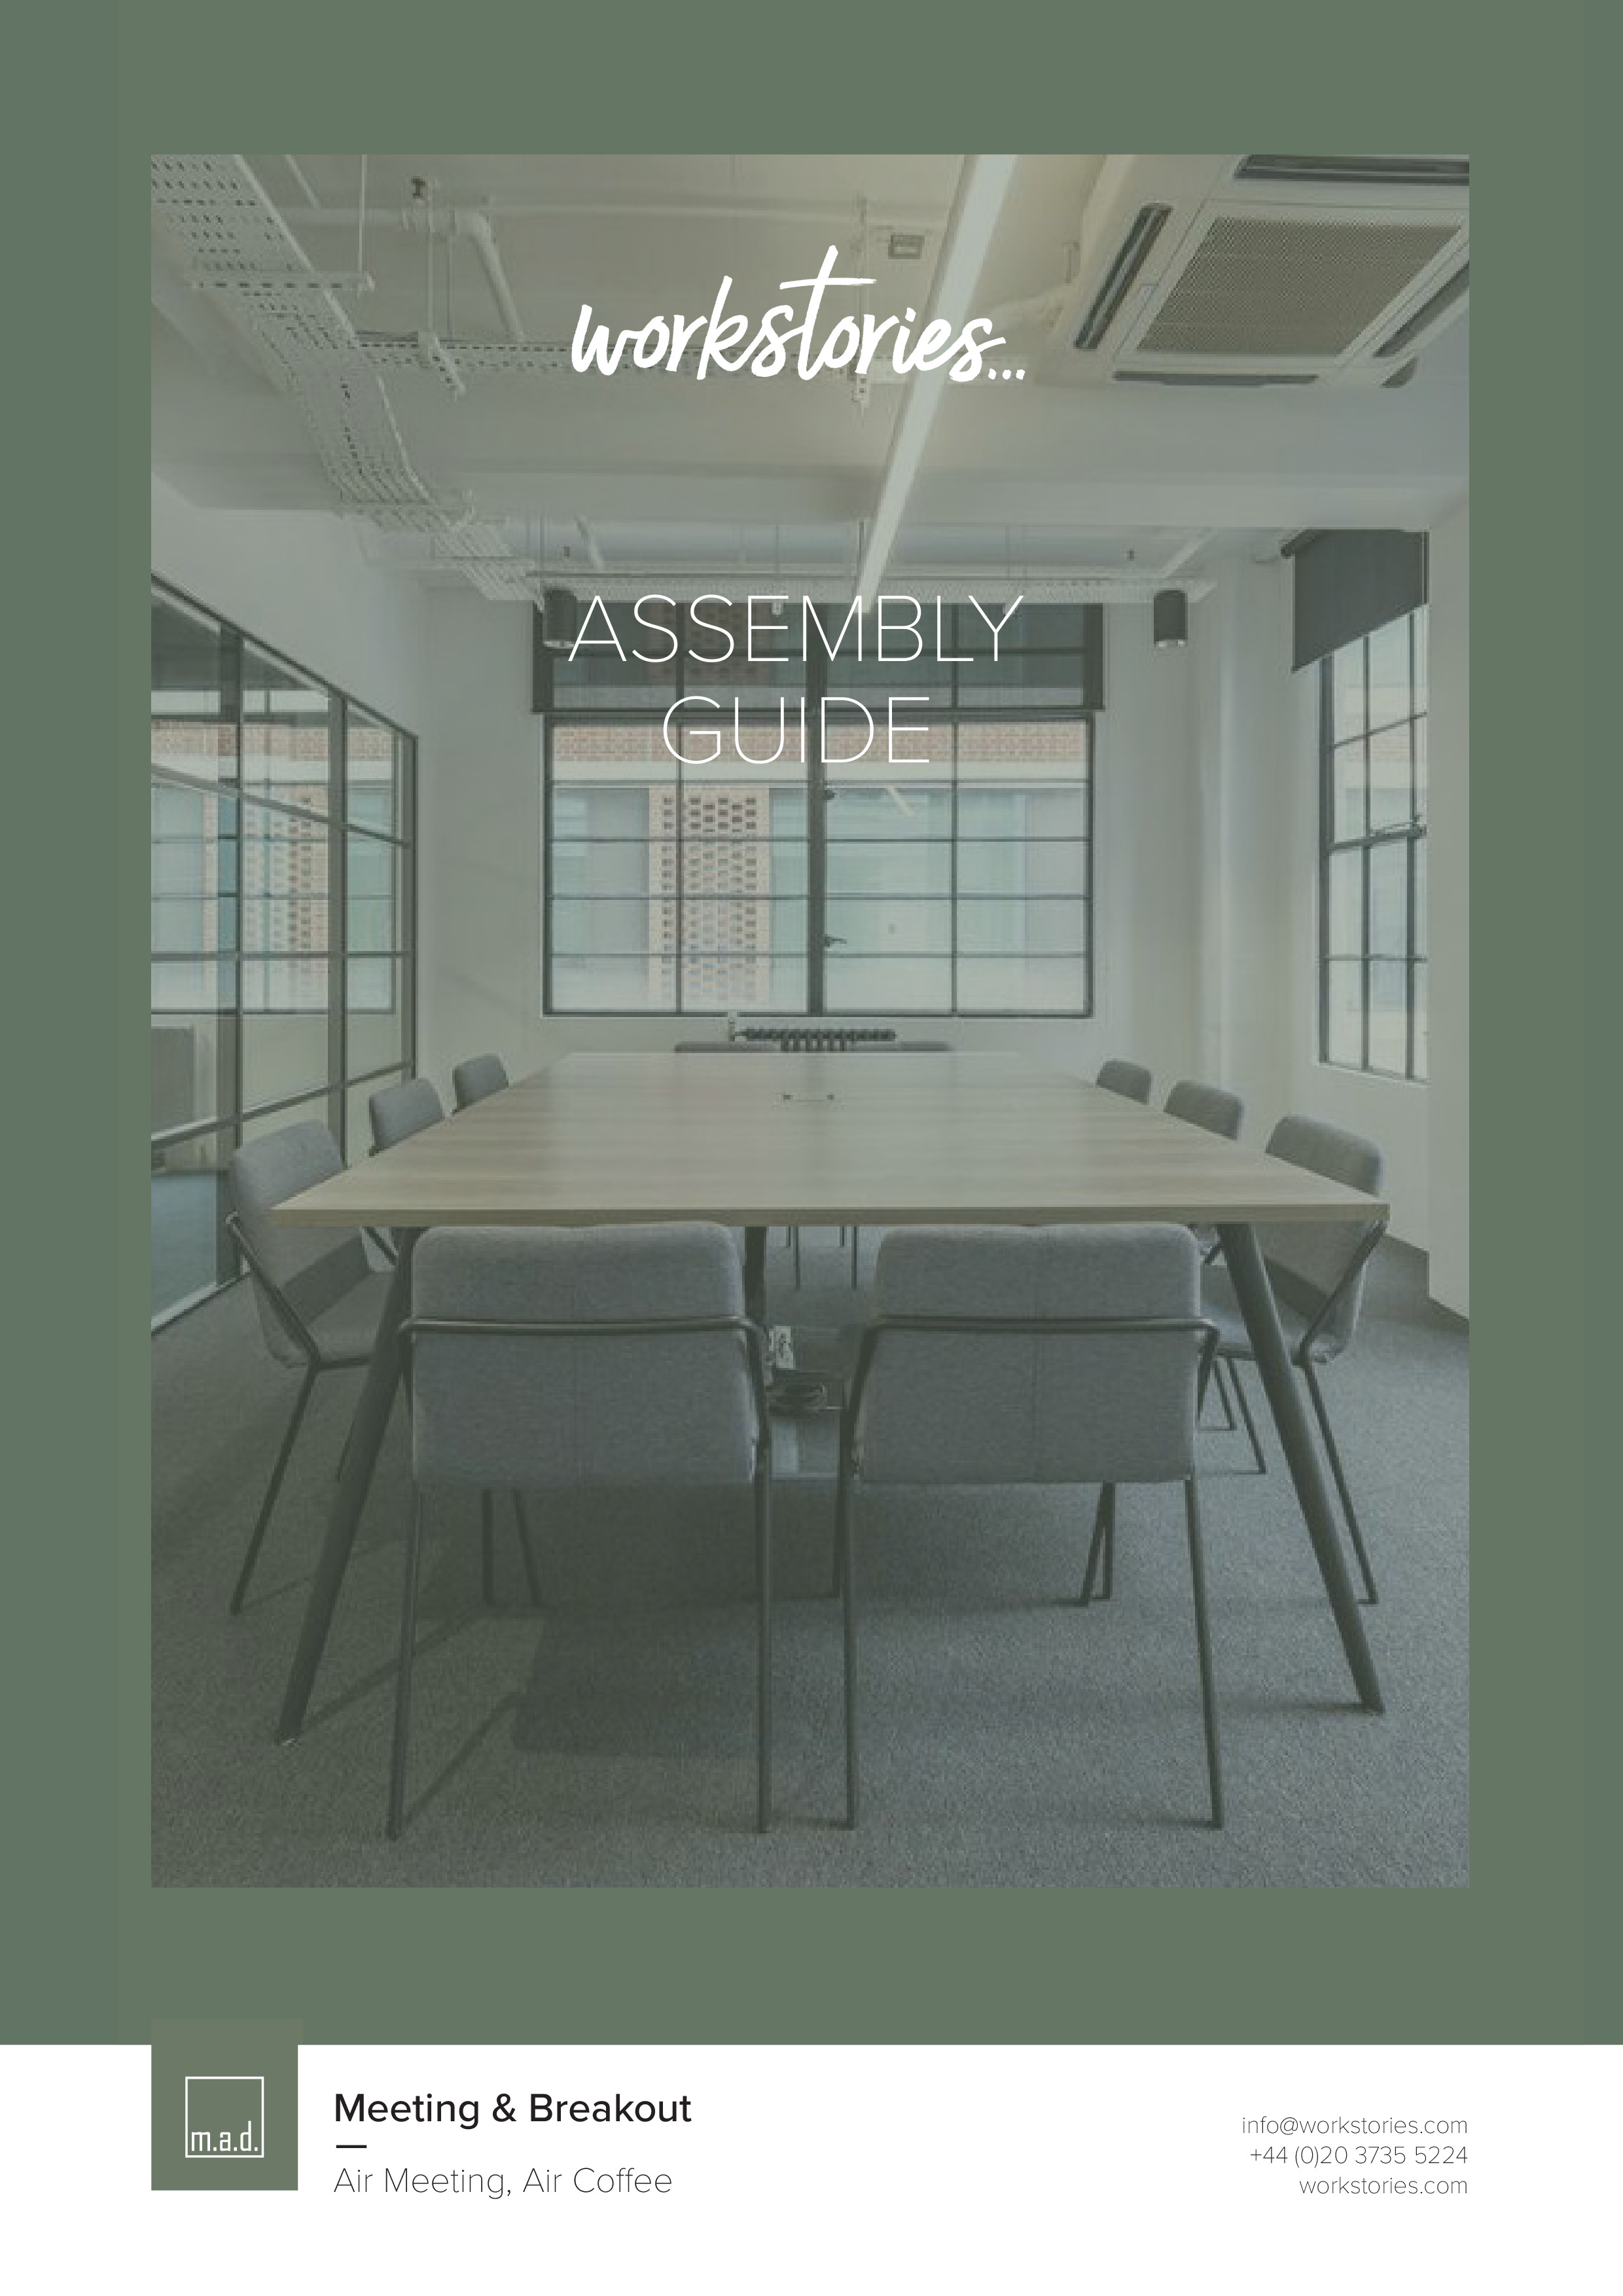 WS - ASSEMBLY GUIDE - Meeting & Breakout - Air